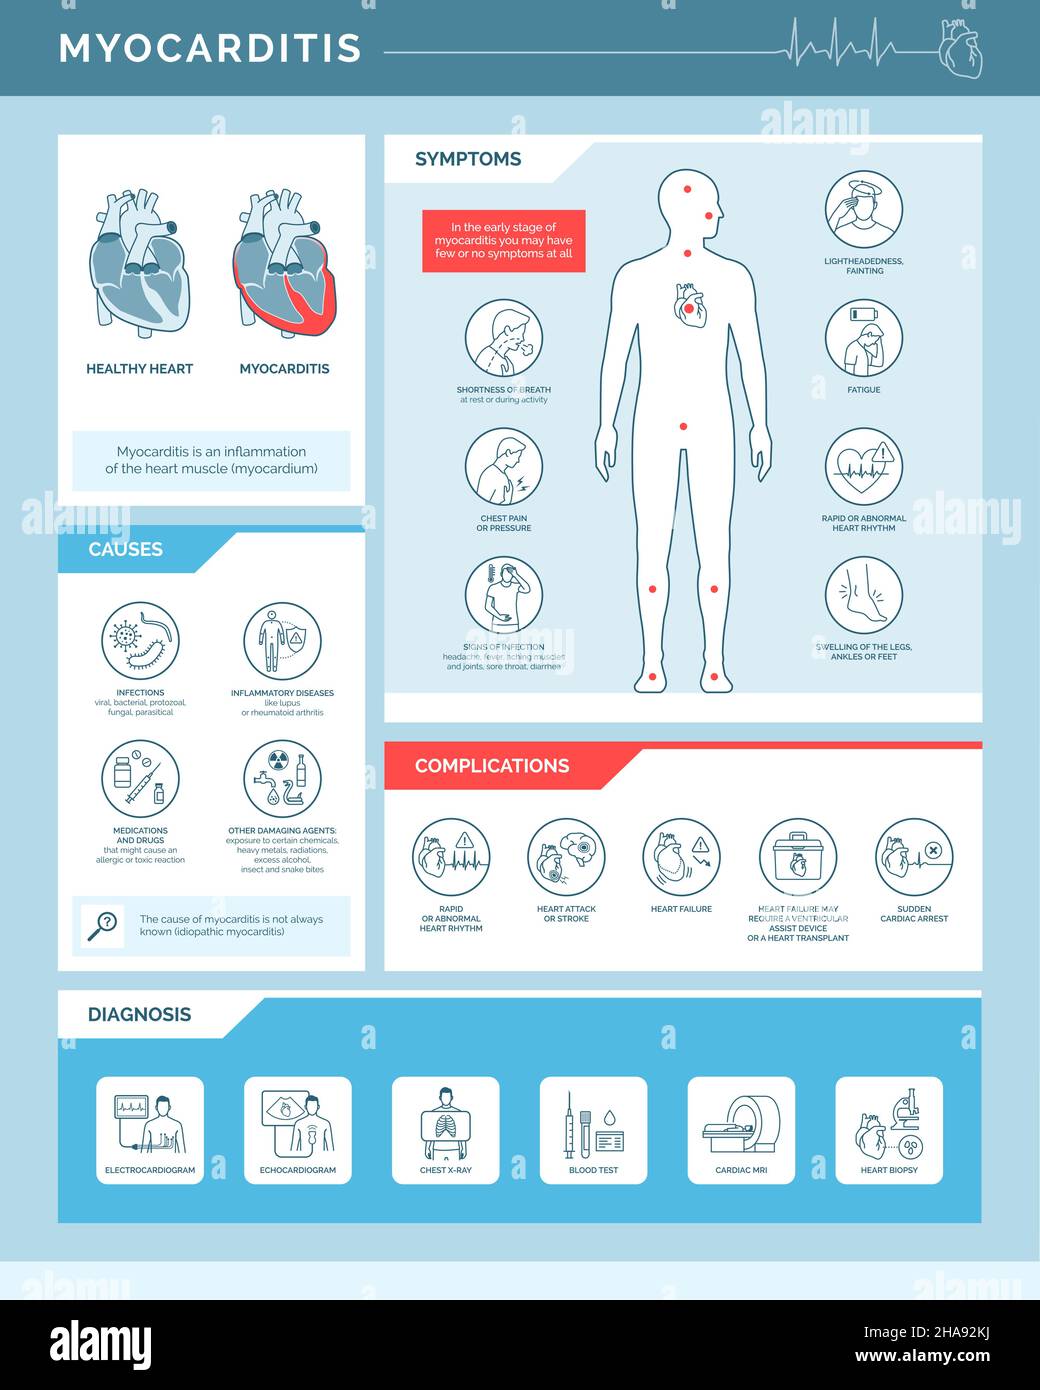 Myocarditis heart inflammation: causes, symptoms, complications and diagnosis, medical infographic with icons Stock Vector